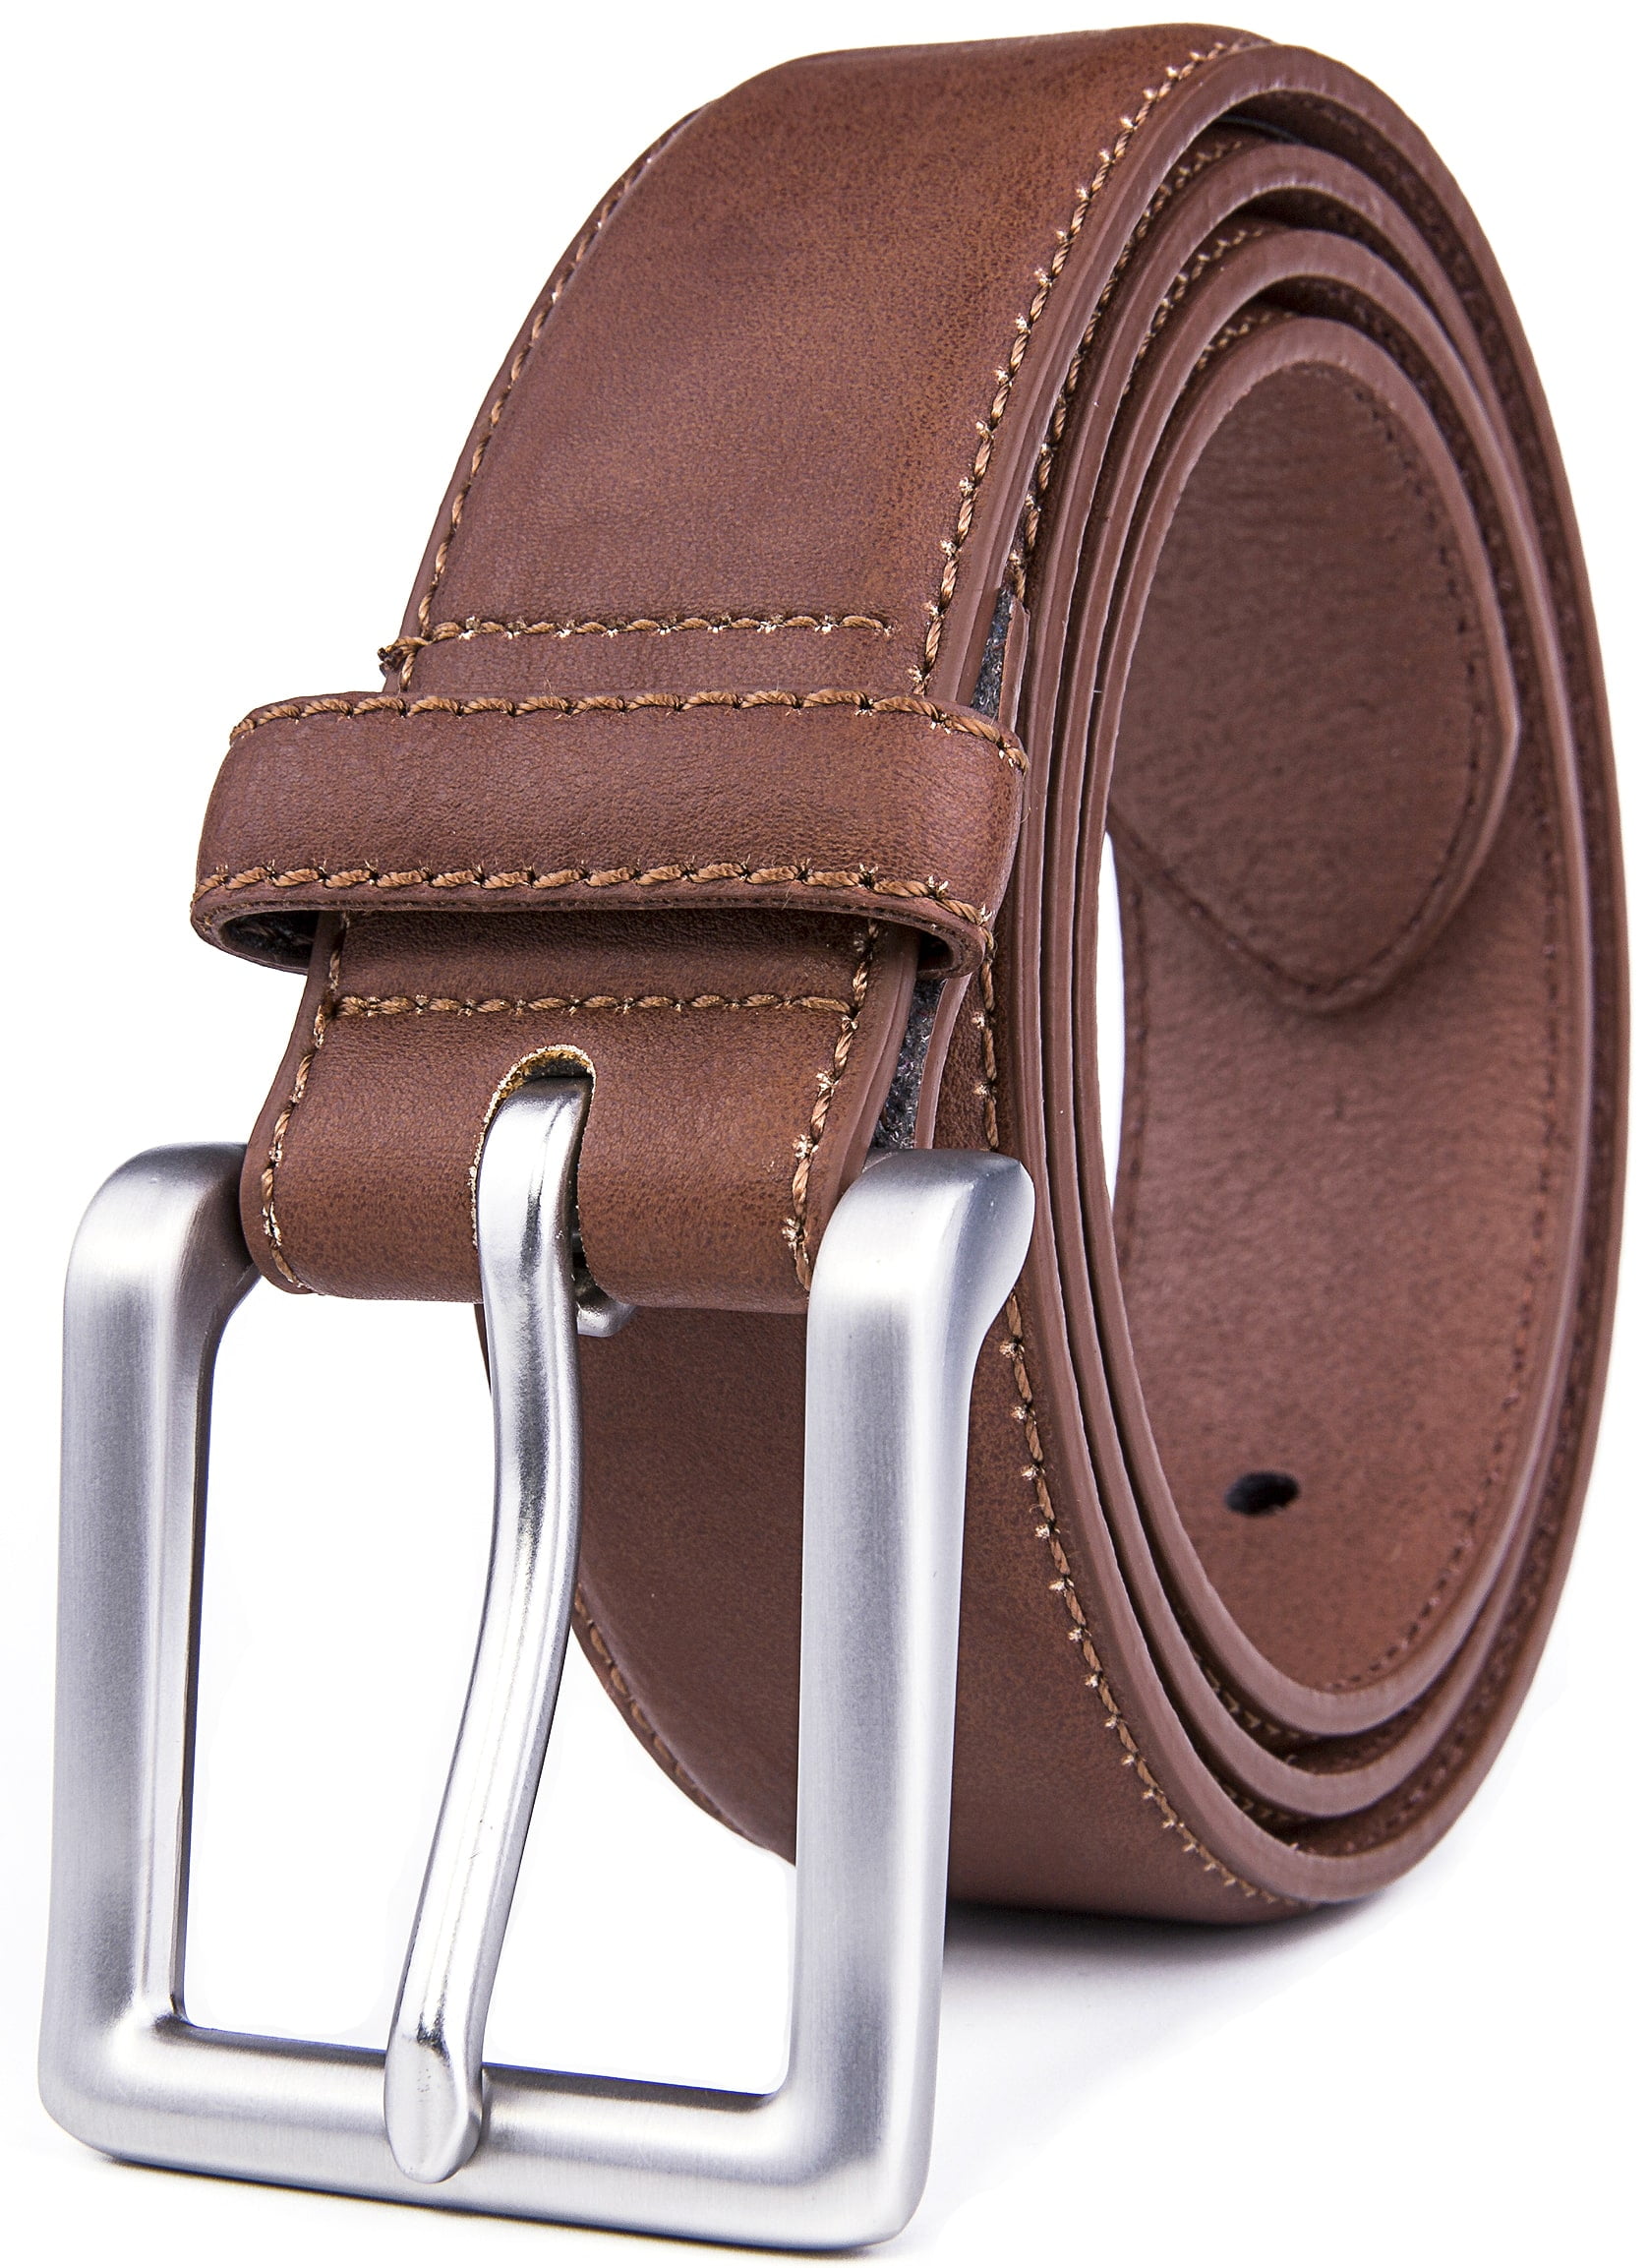 Genuine Leather Dress Belts For Men - Mens Belt For Suits, Jeans, Uniform  With Single Prong Buckle - Designed in the USA 